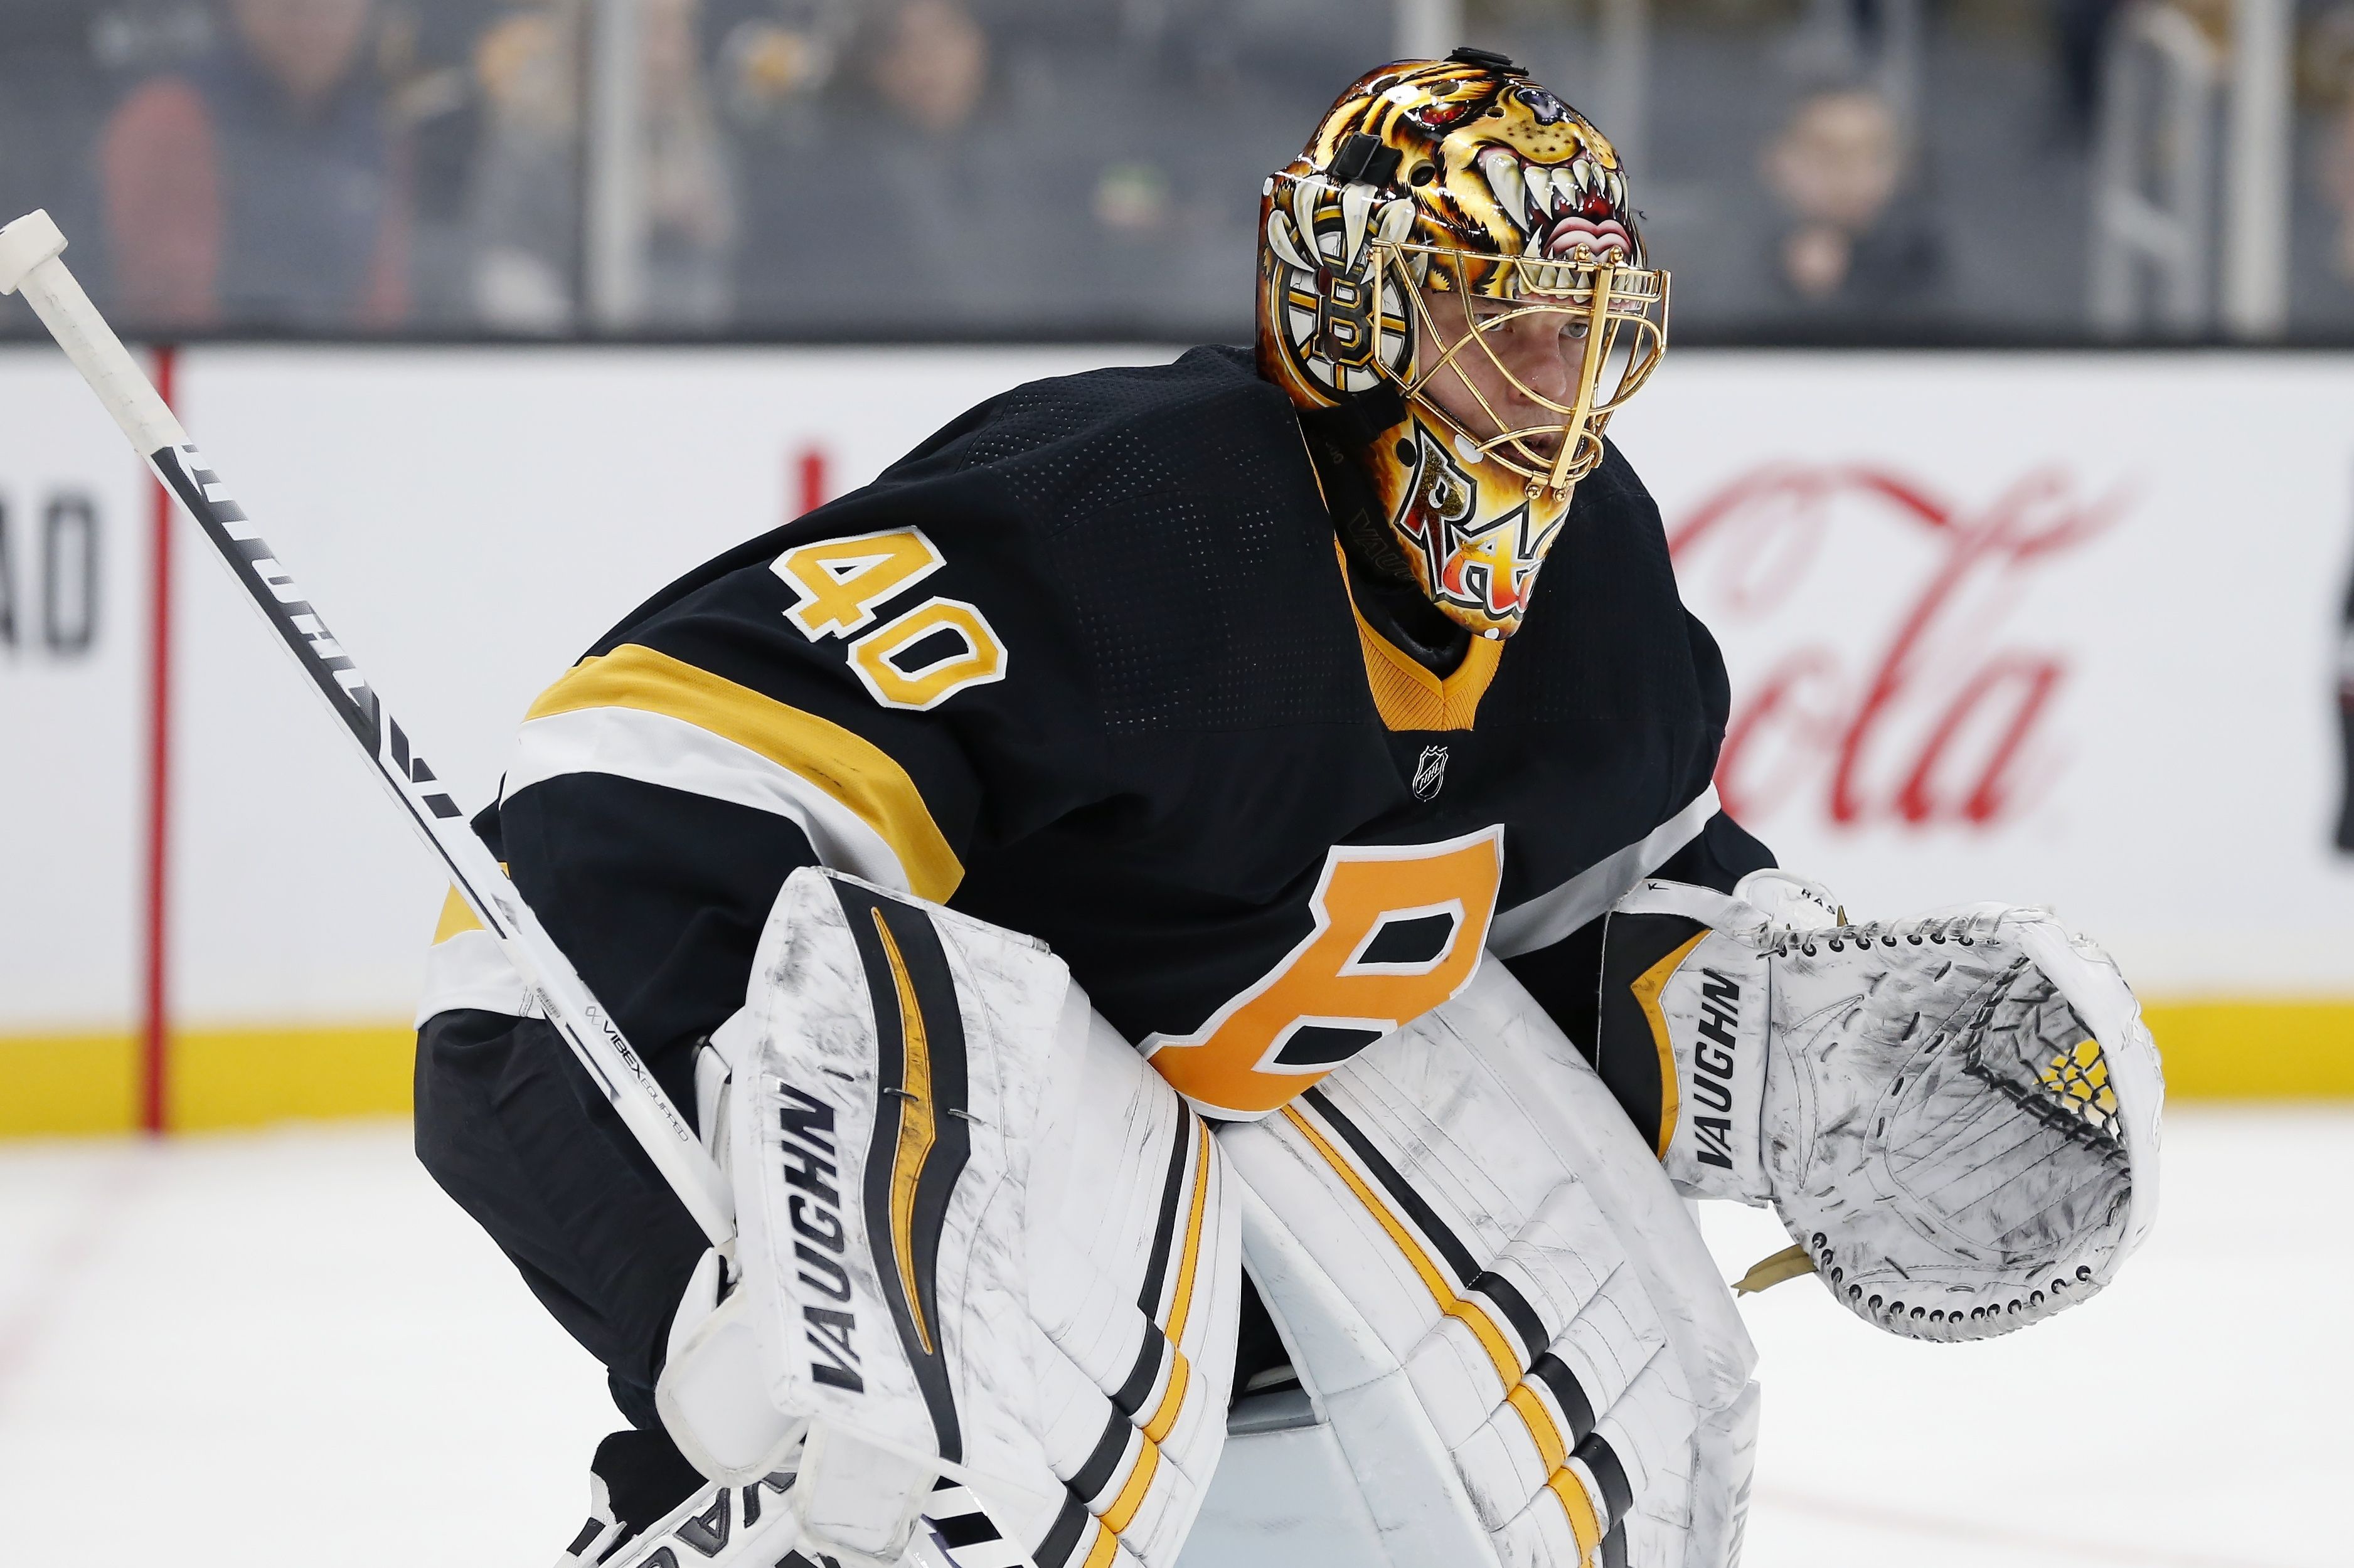 Tuukka Rask powers Bruins to victory with 39-save shutout in Game